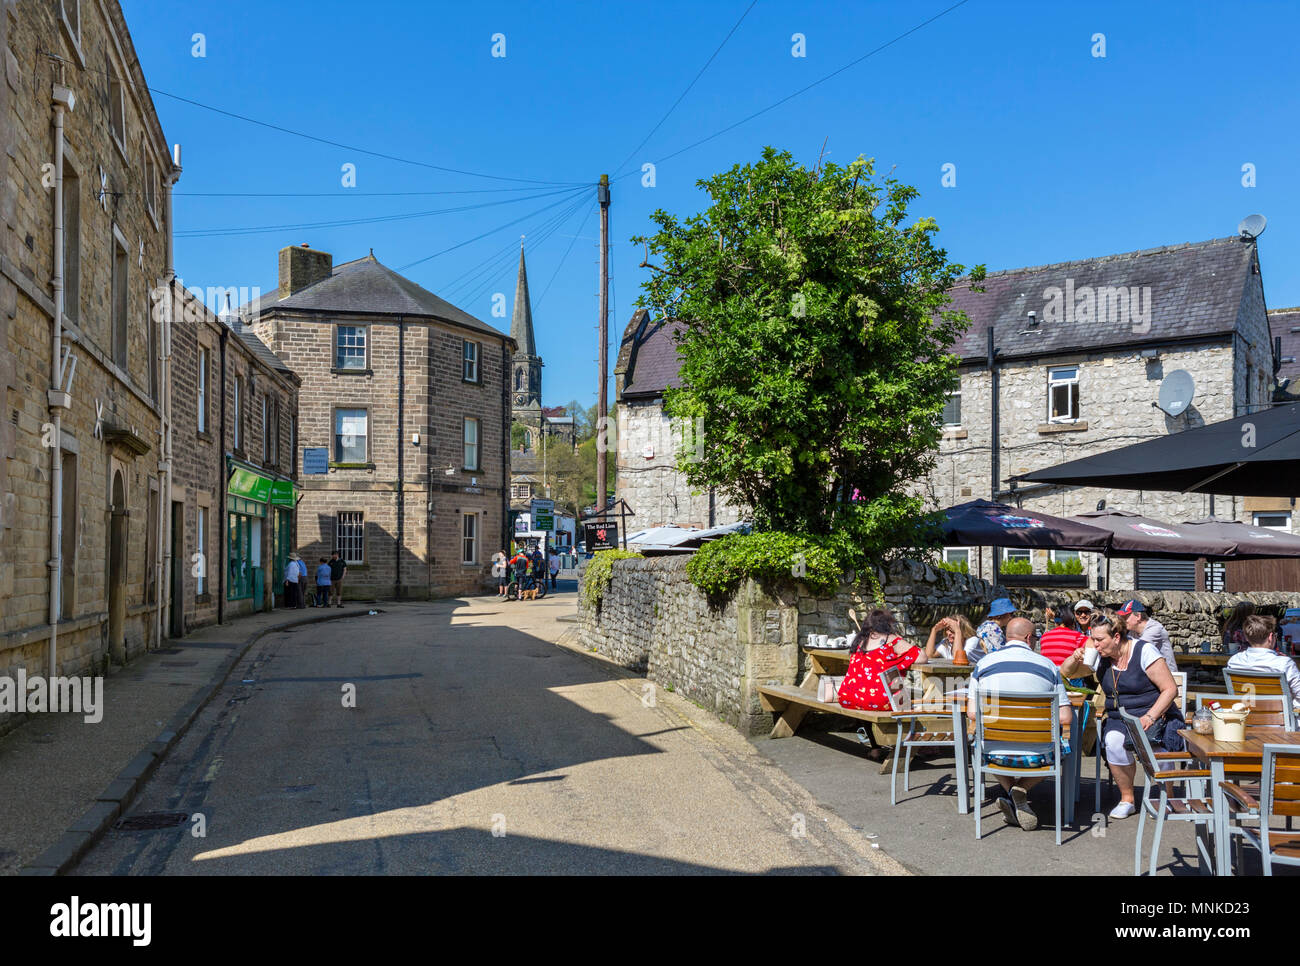 Cafe and shops on Water Street in the town centre, Bakewell, Derbyshire, England, UK Stock Photo